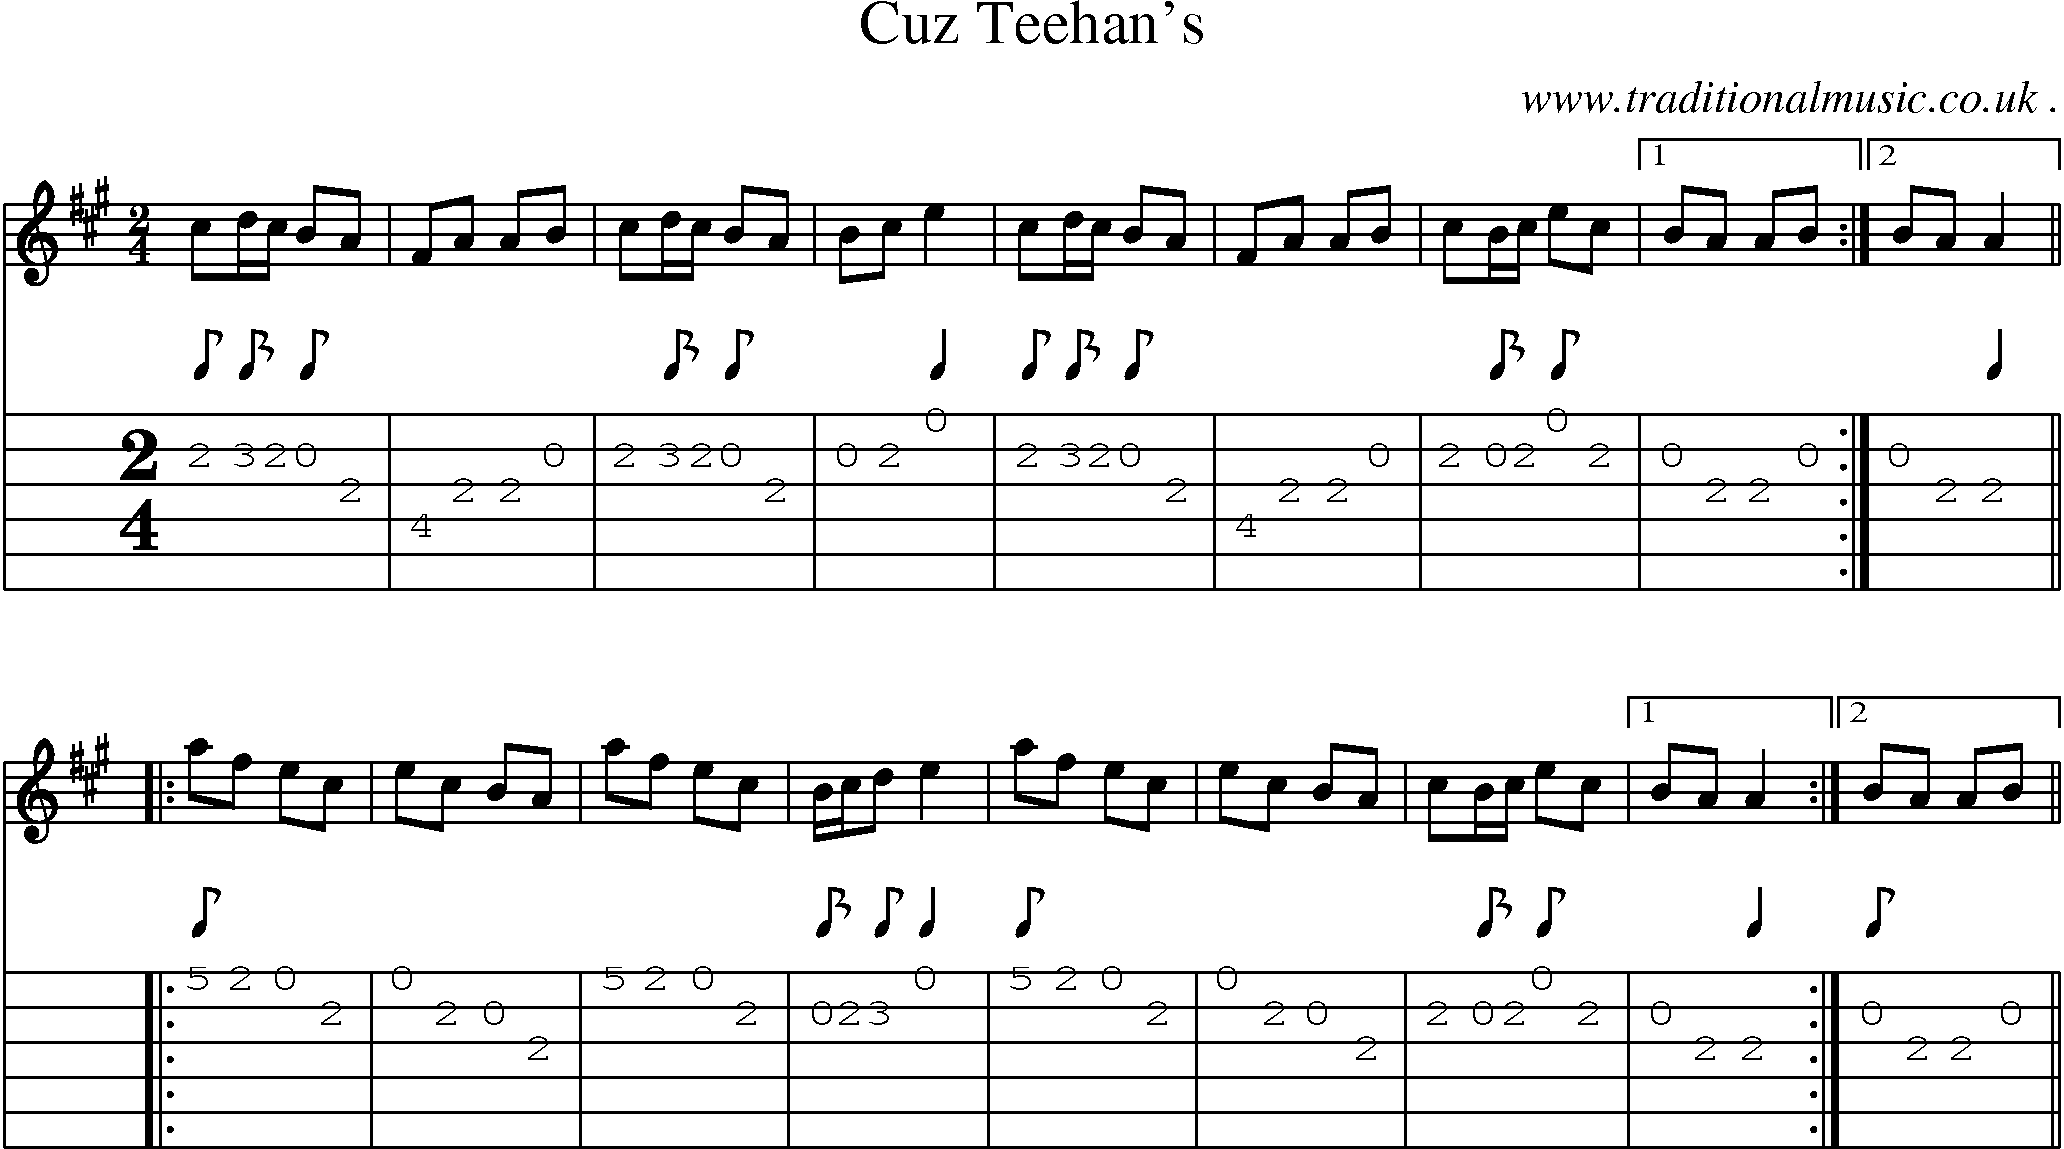 Sheet-Music and Guitar Tabs for Cuz Teehans